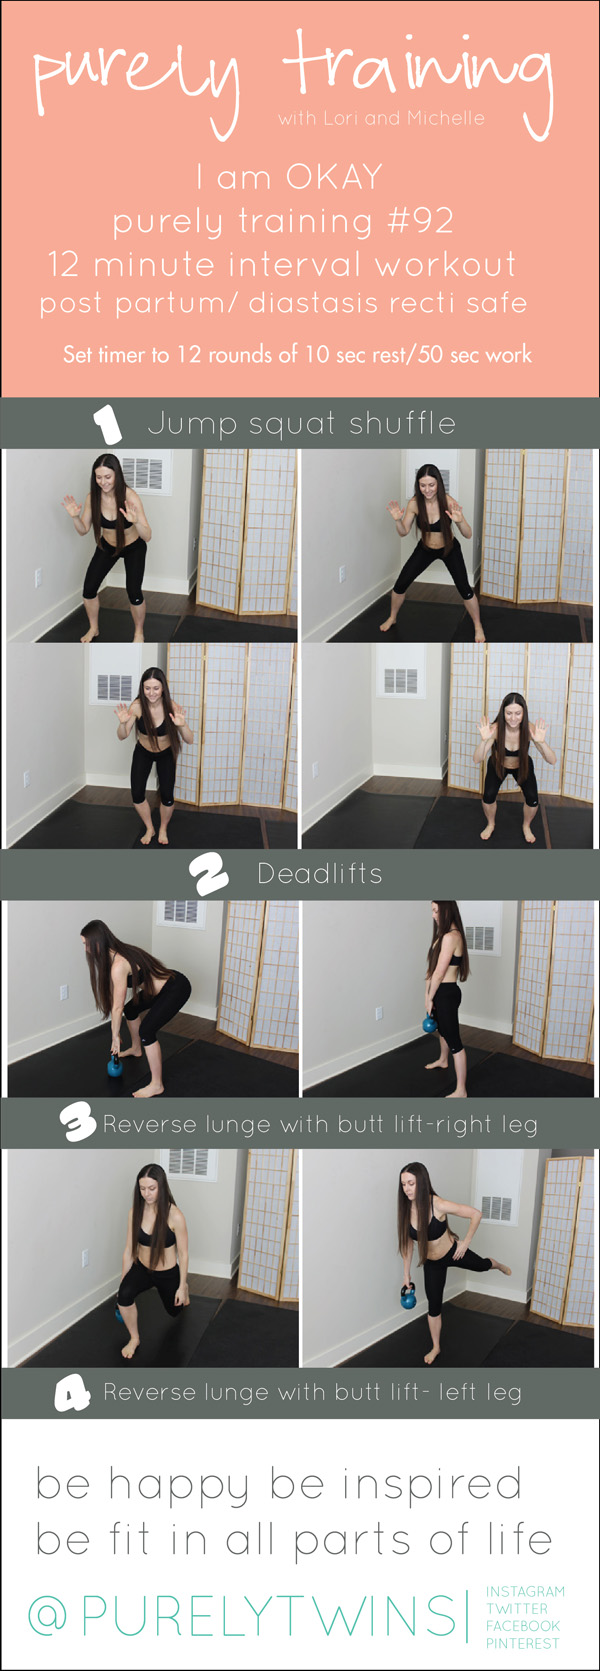 A diastasis recti safe workout for postpartum moms that only takes 12 minutes. Home workout for busy moms to get in shape at home.